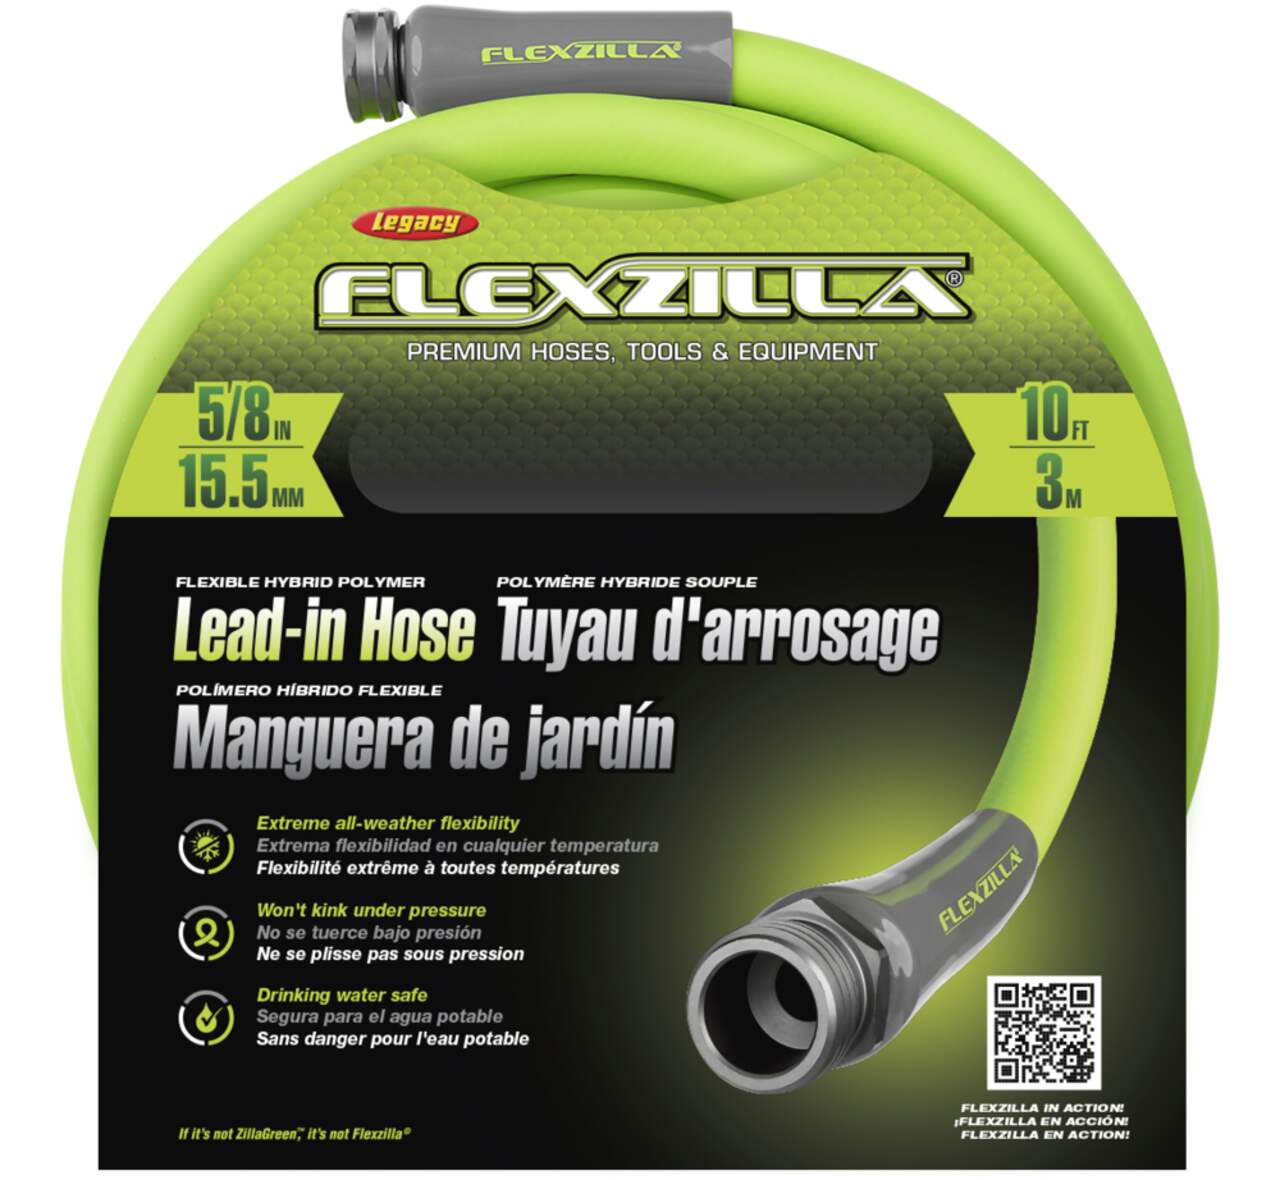 https://media-www.canadiantire.ca/product/seasonal-gardening/outdoor-tools/watering/0591457/flexzilla-10-leader-hose-1e1af228-4803-42aa-97fc-104a87b2ee5e.png?imdensity=1&imwidth=1244&impolicy=mZoom